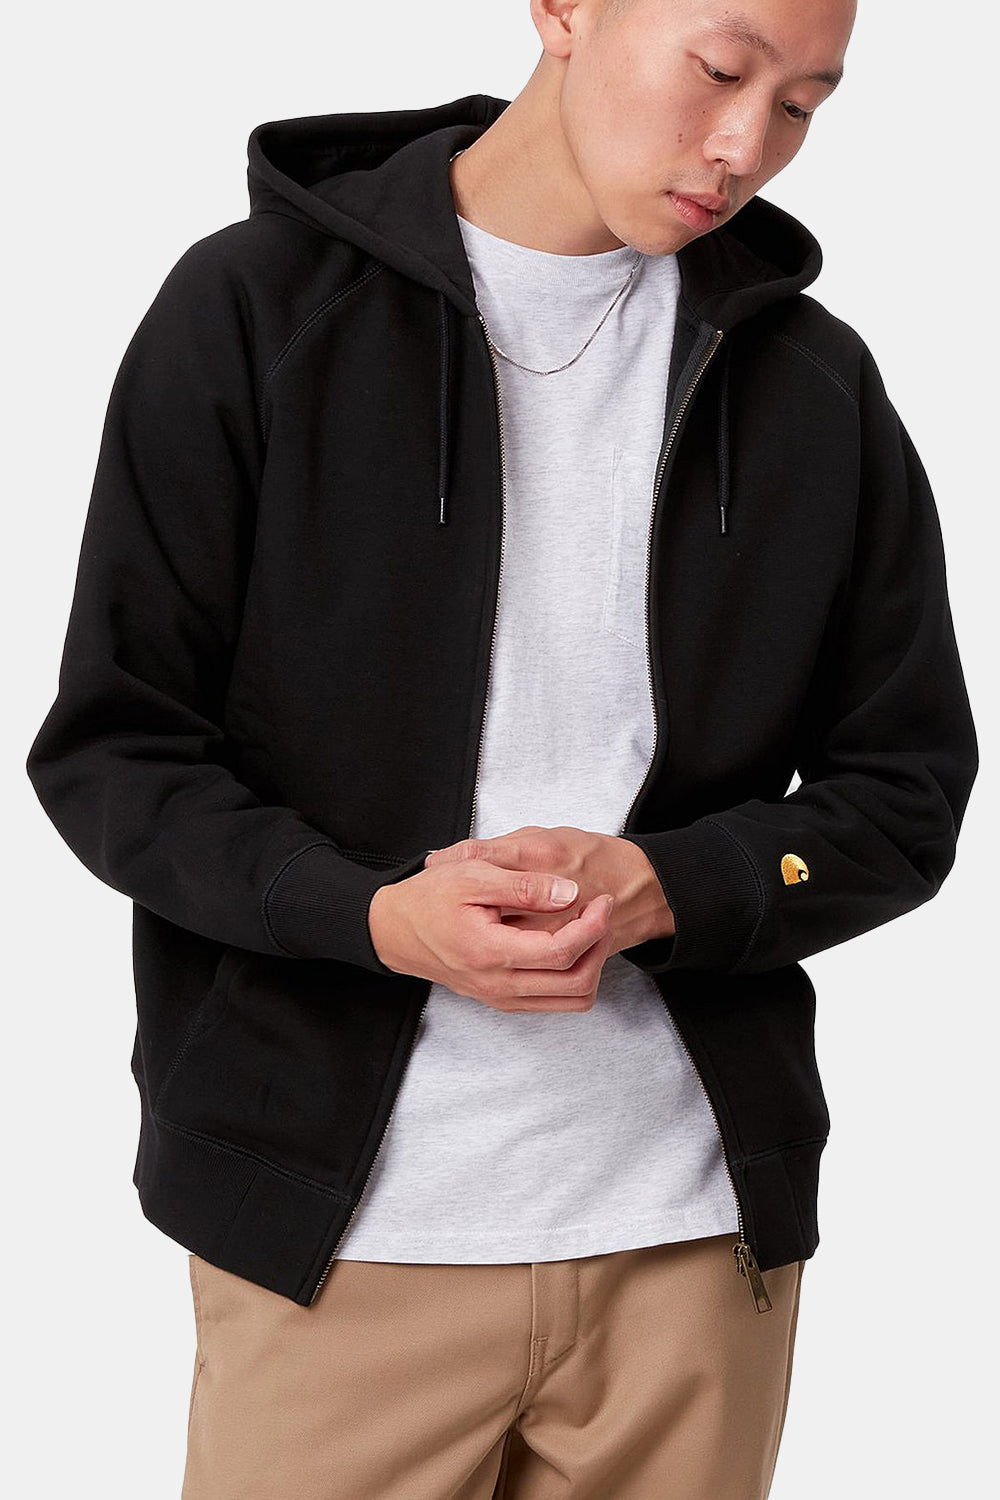 Carhartt WIP Hooded Chase Jacket (Black/Gold)